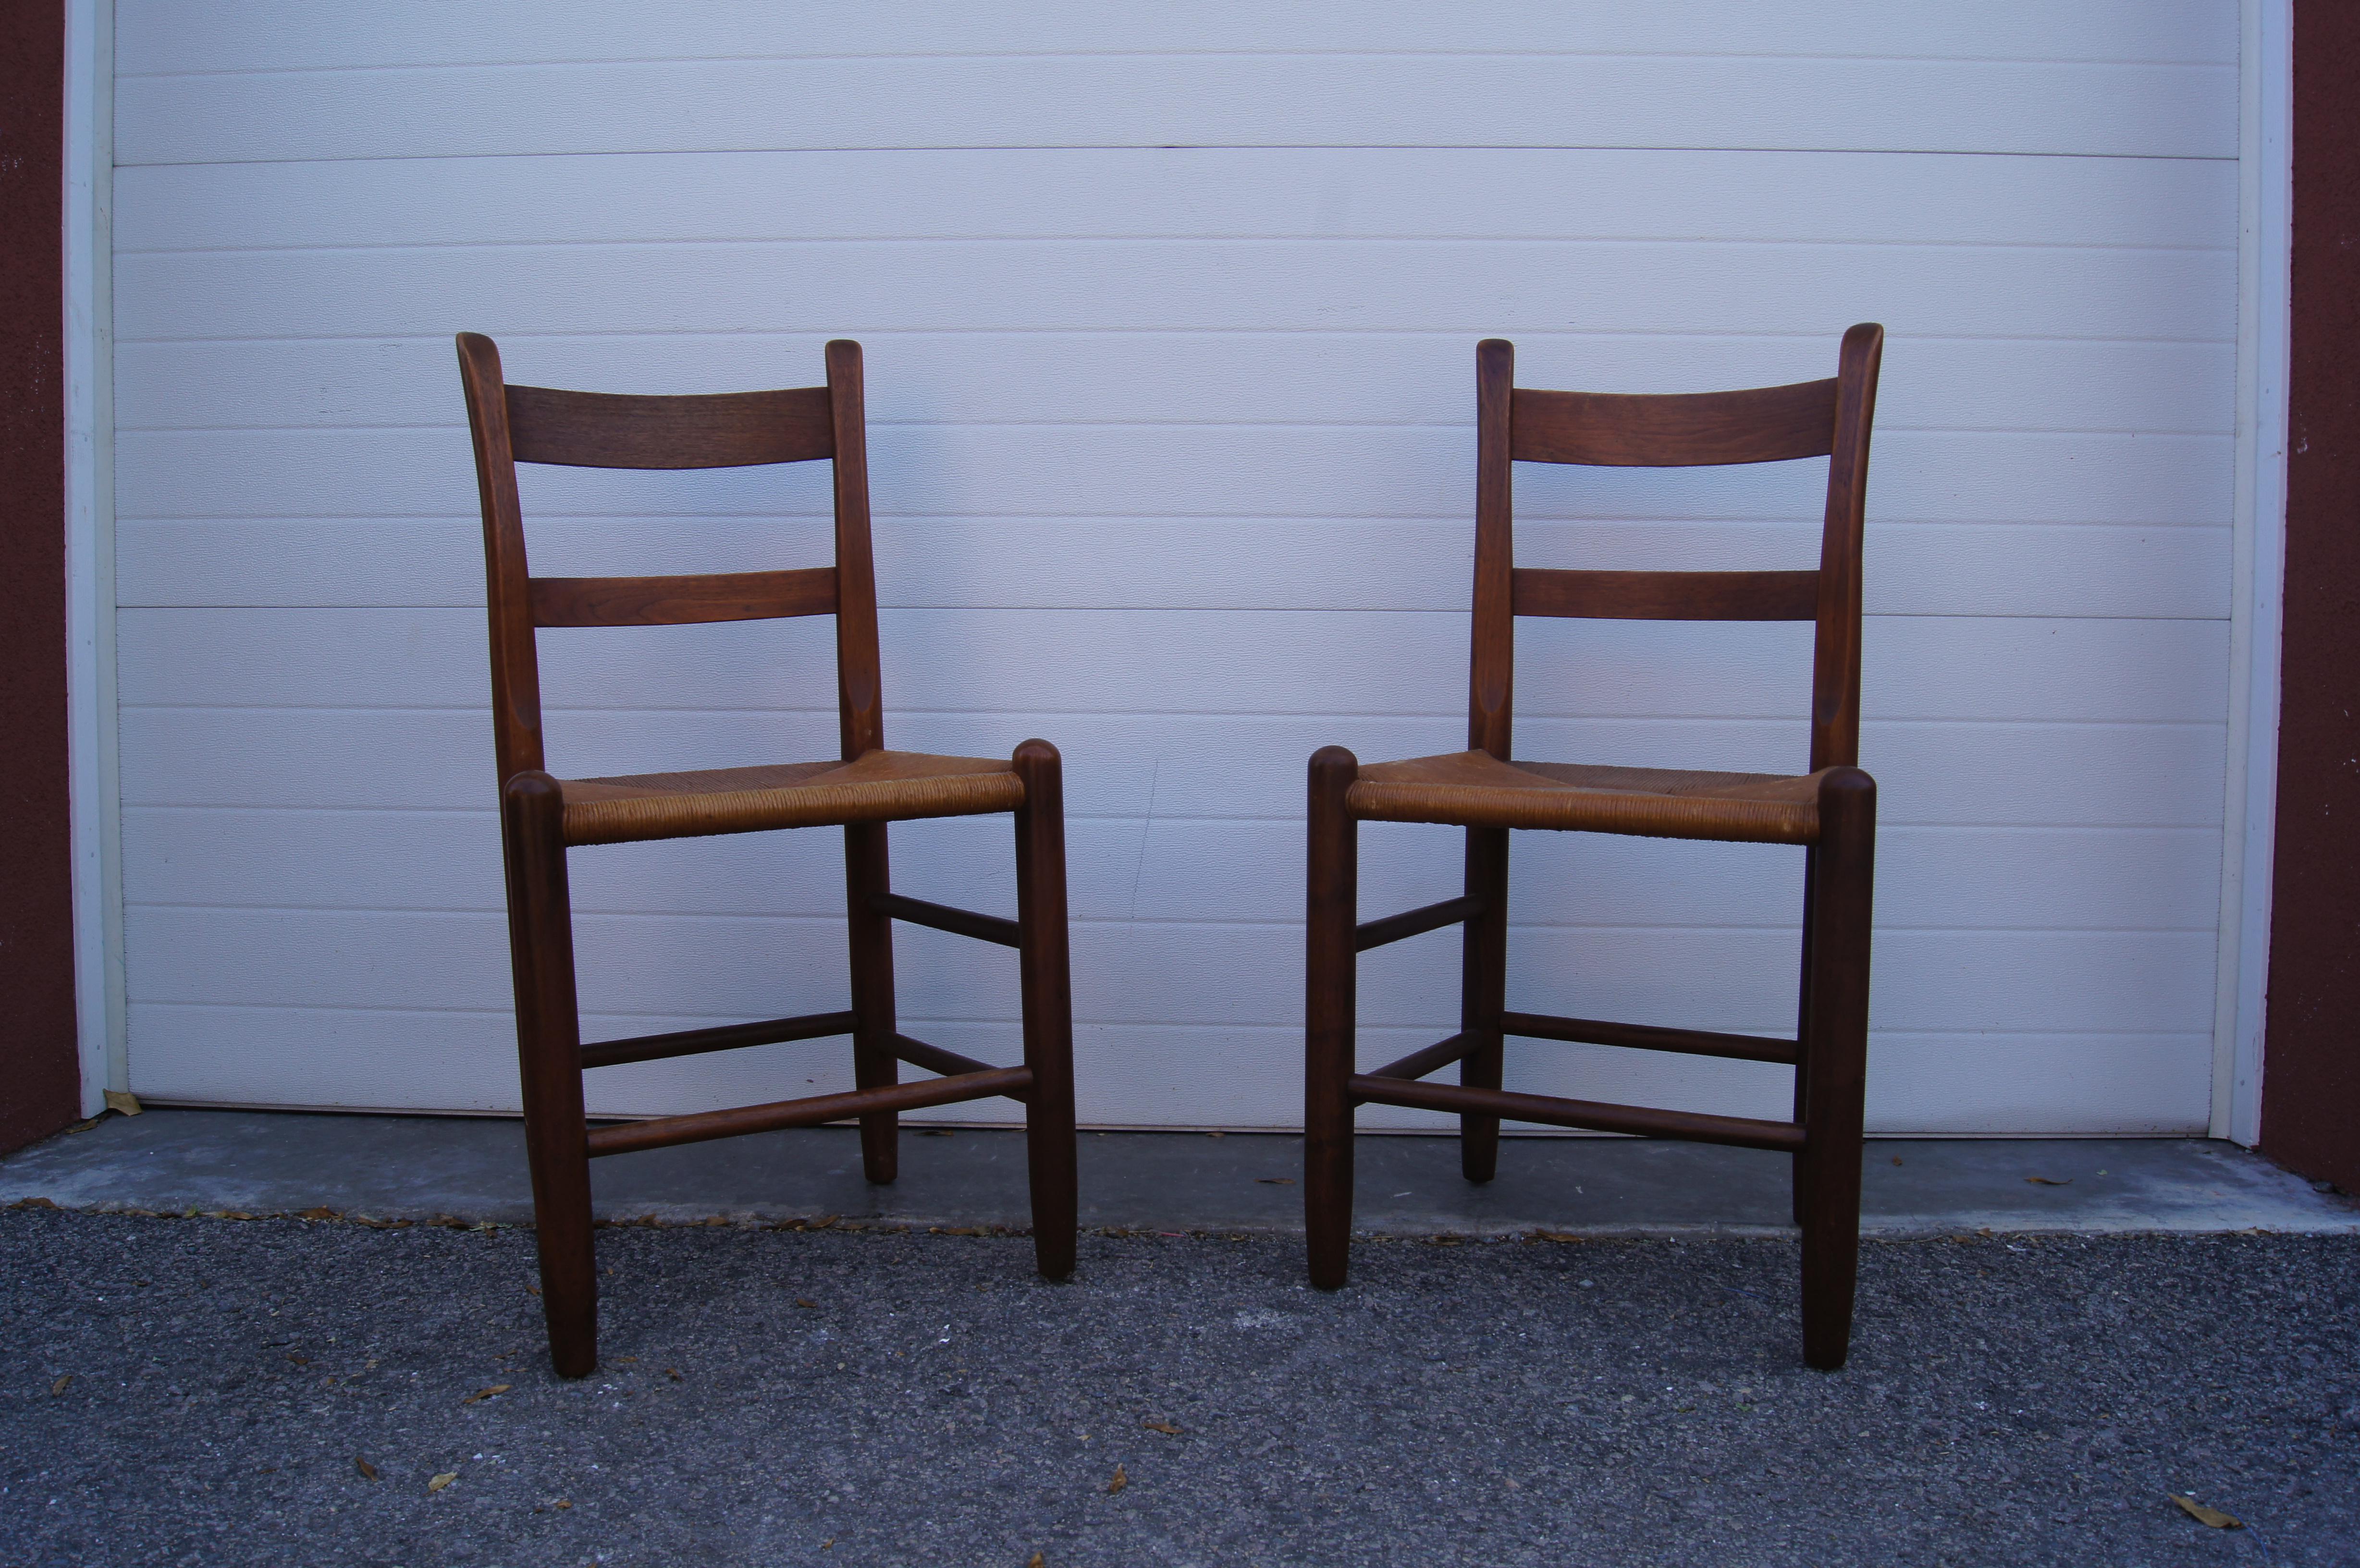 This pair of dining chairs by the Cambridge, Massachusetts, furniture maker Charles Webb features solid teak frames with angled backs and rush seats.